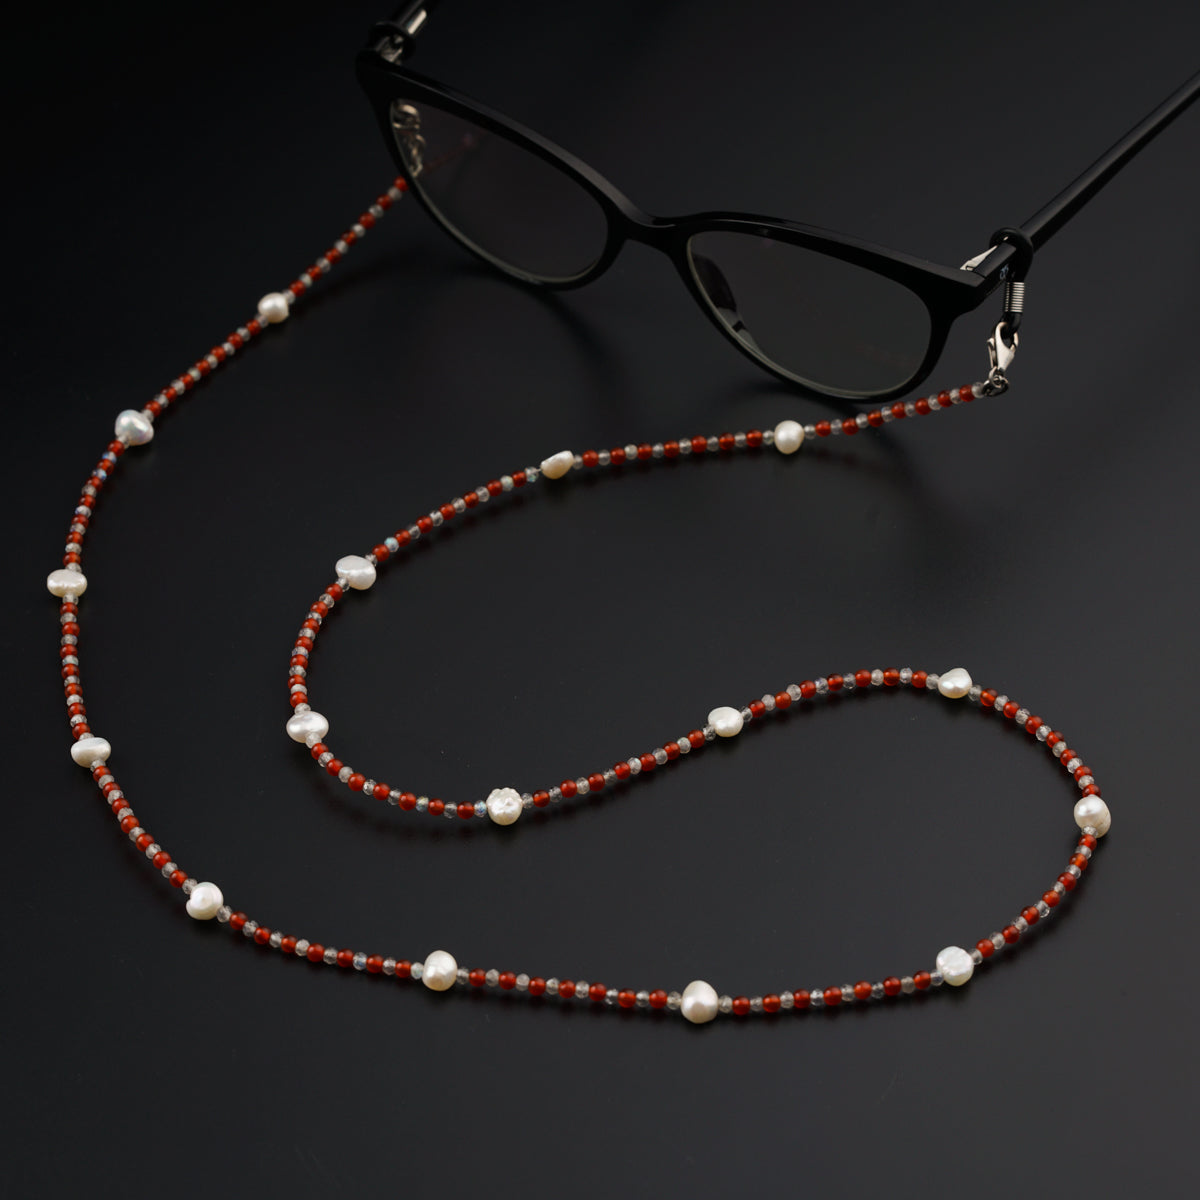 a pair of glasses and a beaded necklace